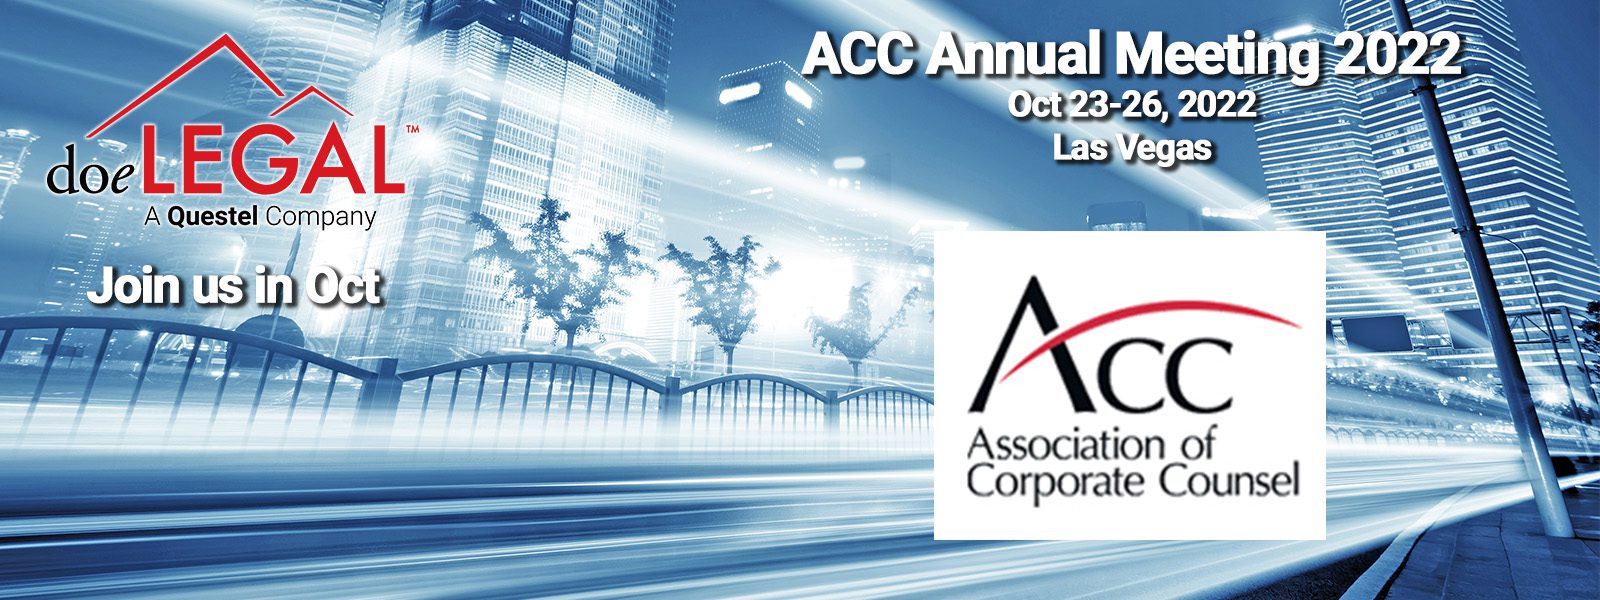 AM22 - Las Vegas and Resorts World map  Association of Corporate Counsel  (ACC)